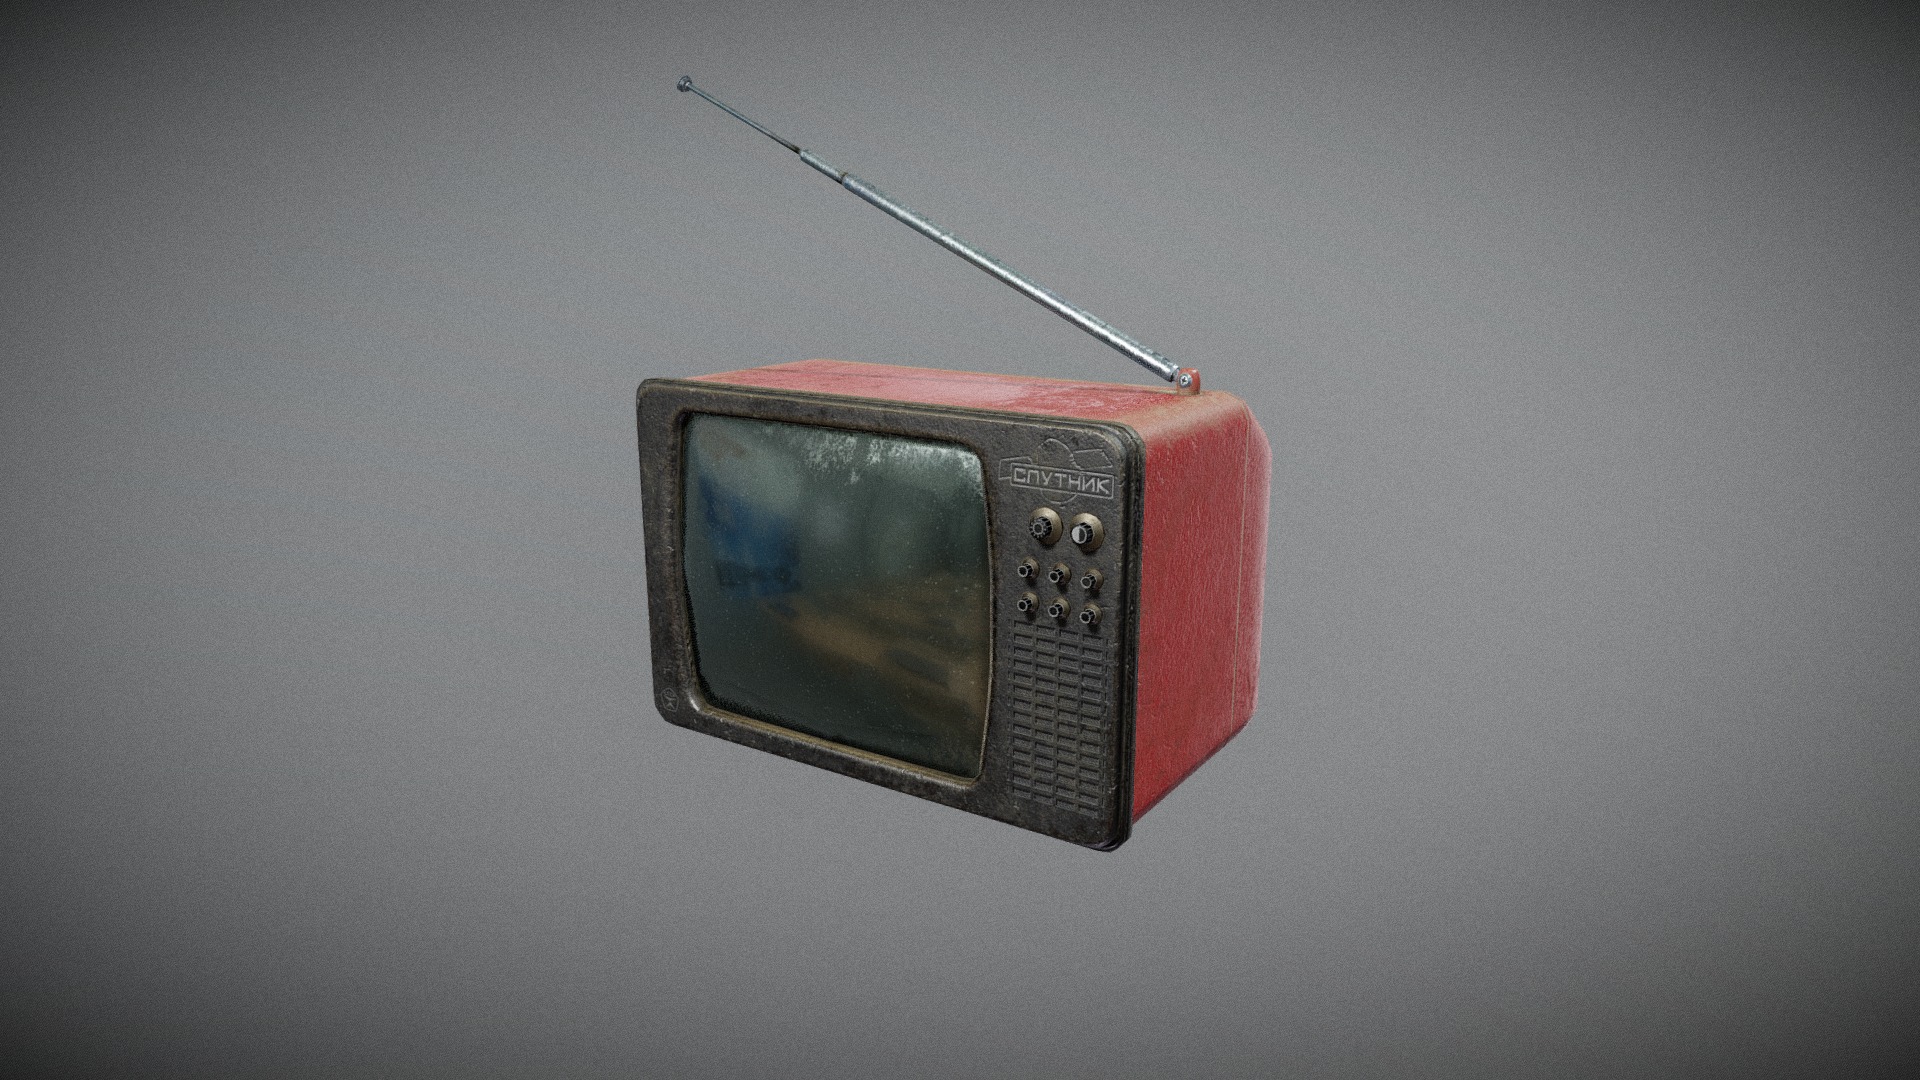 3D model TV - This is a 3D model of the TV. The 3D model is about a red and black electrical device.